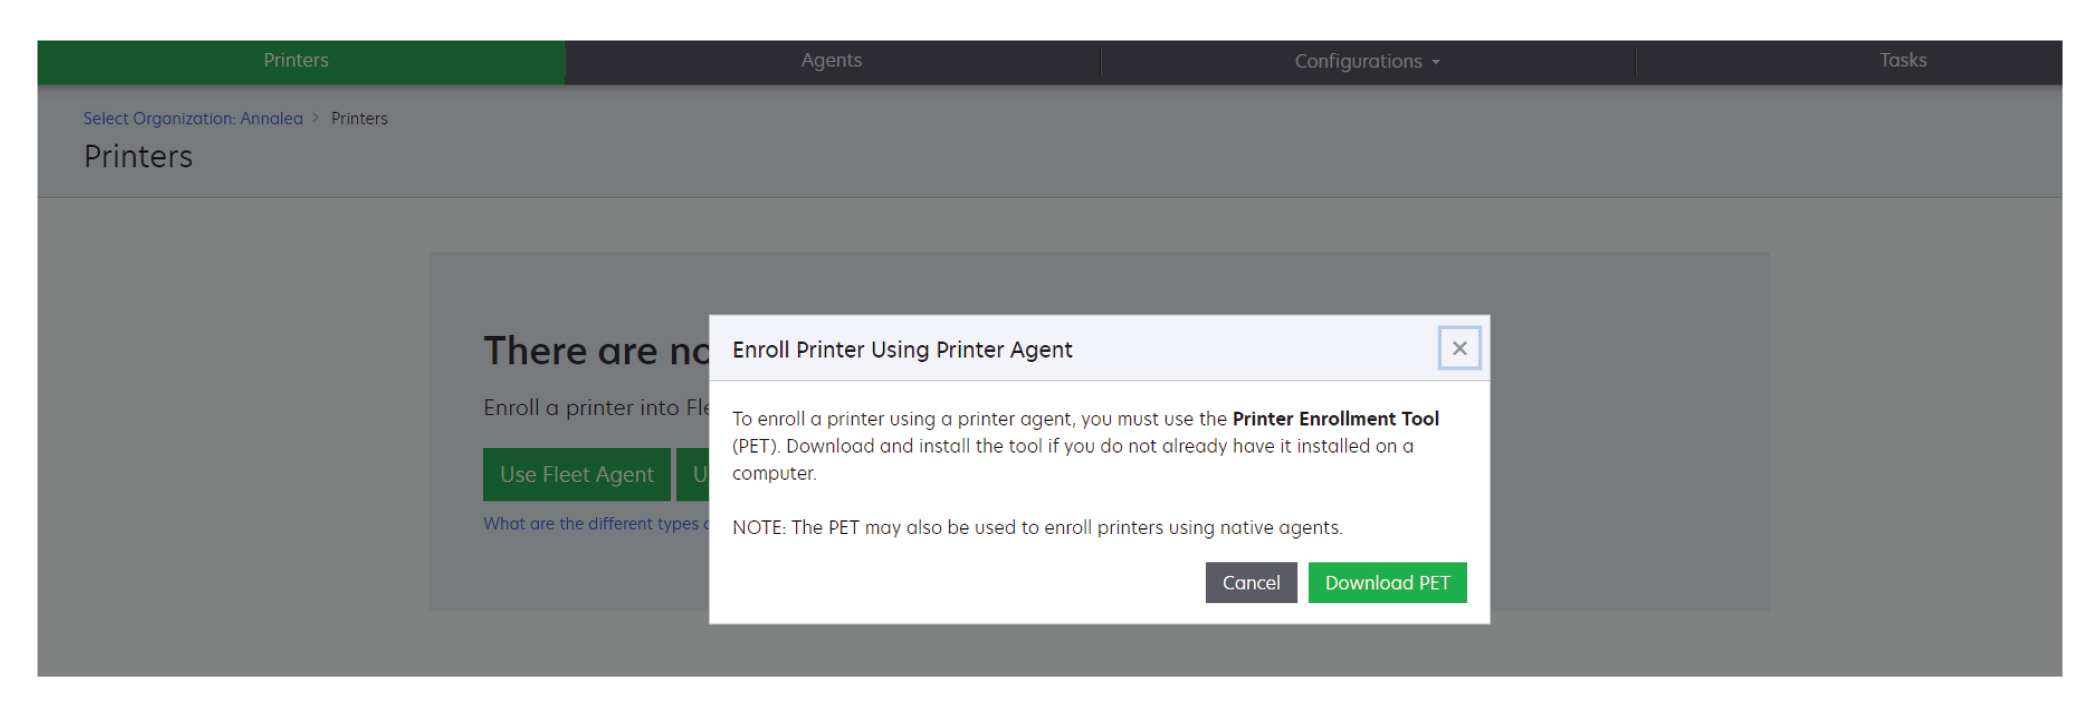 A screenshot showing how to download the Printer Enrollment Tool when the printer listing page is empty